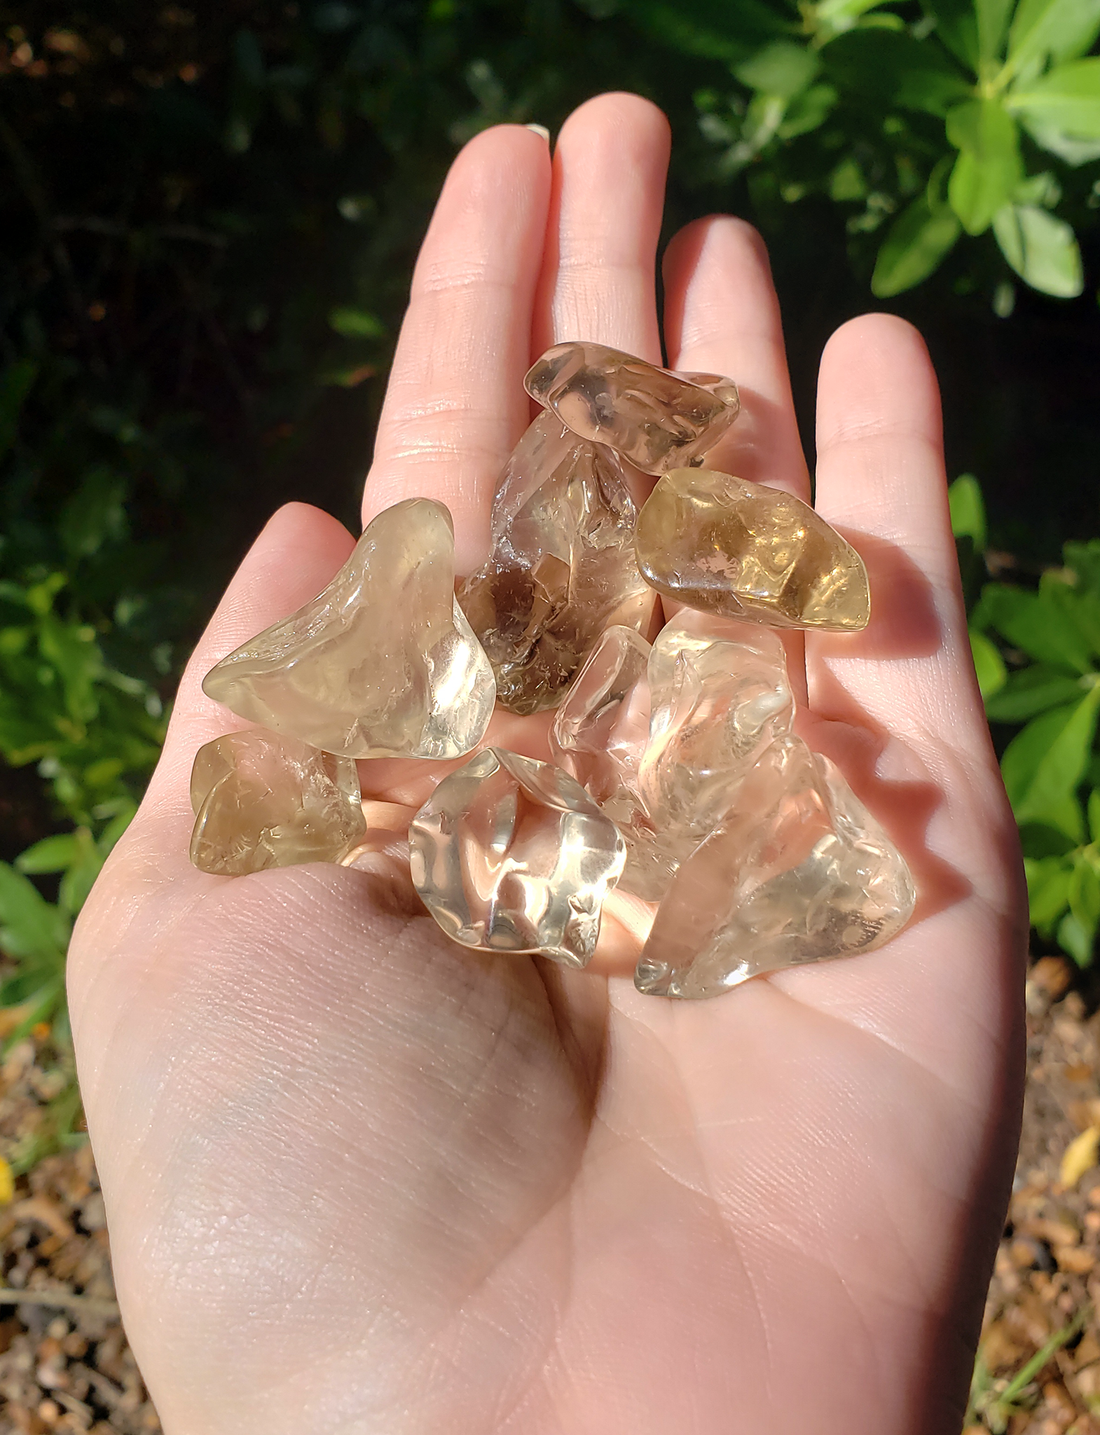 Smoky Quartz Tumbled Gemstone - One Stone or Bulk Wholesale Lots - Outdoor Light on Group in Hand